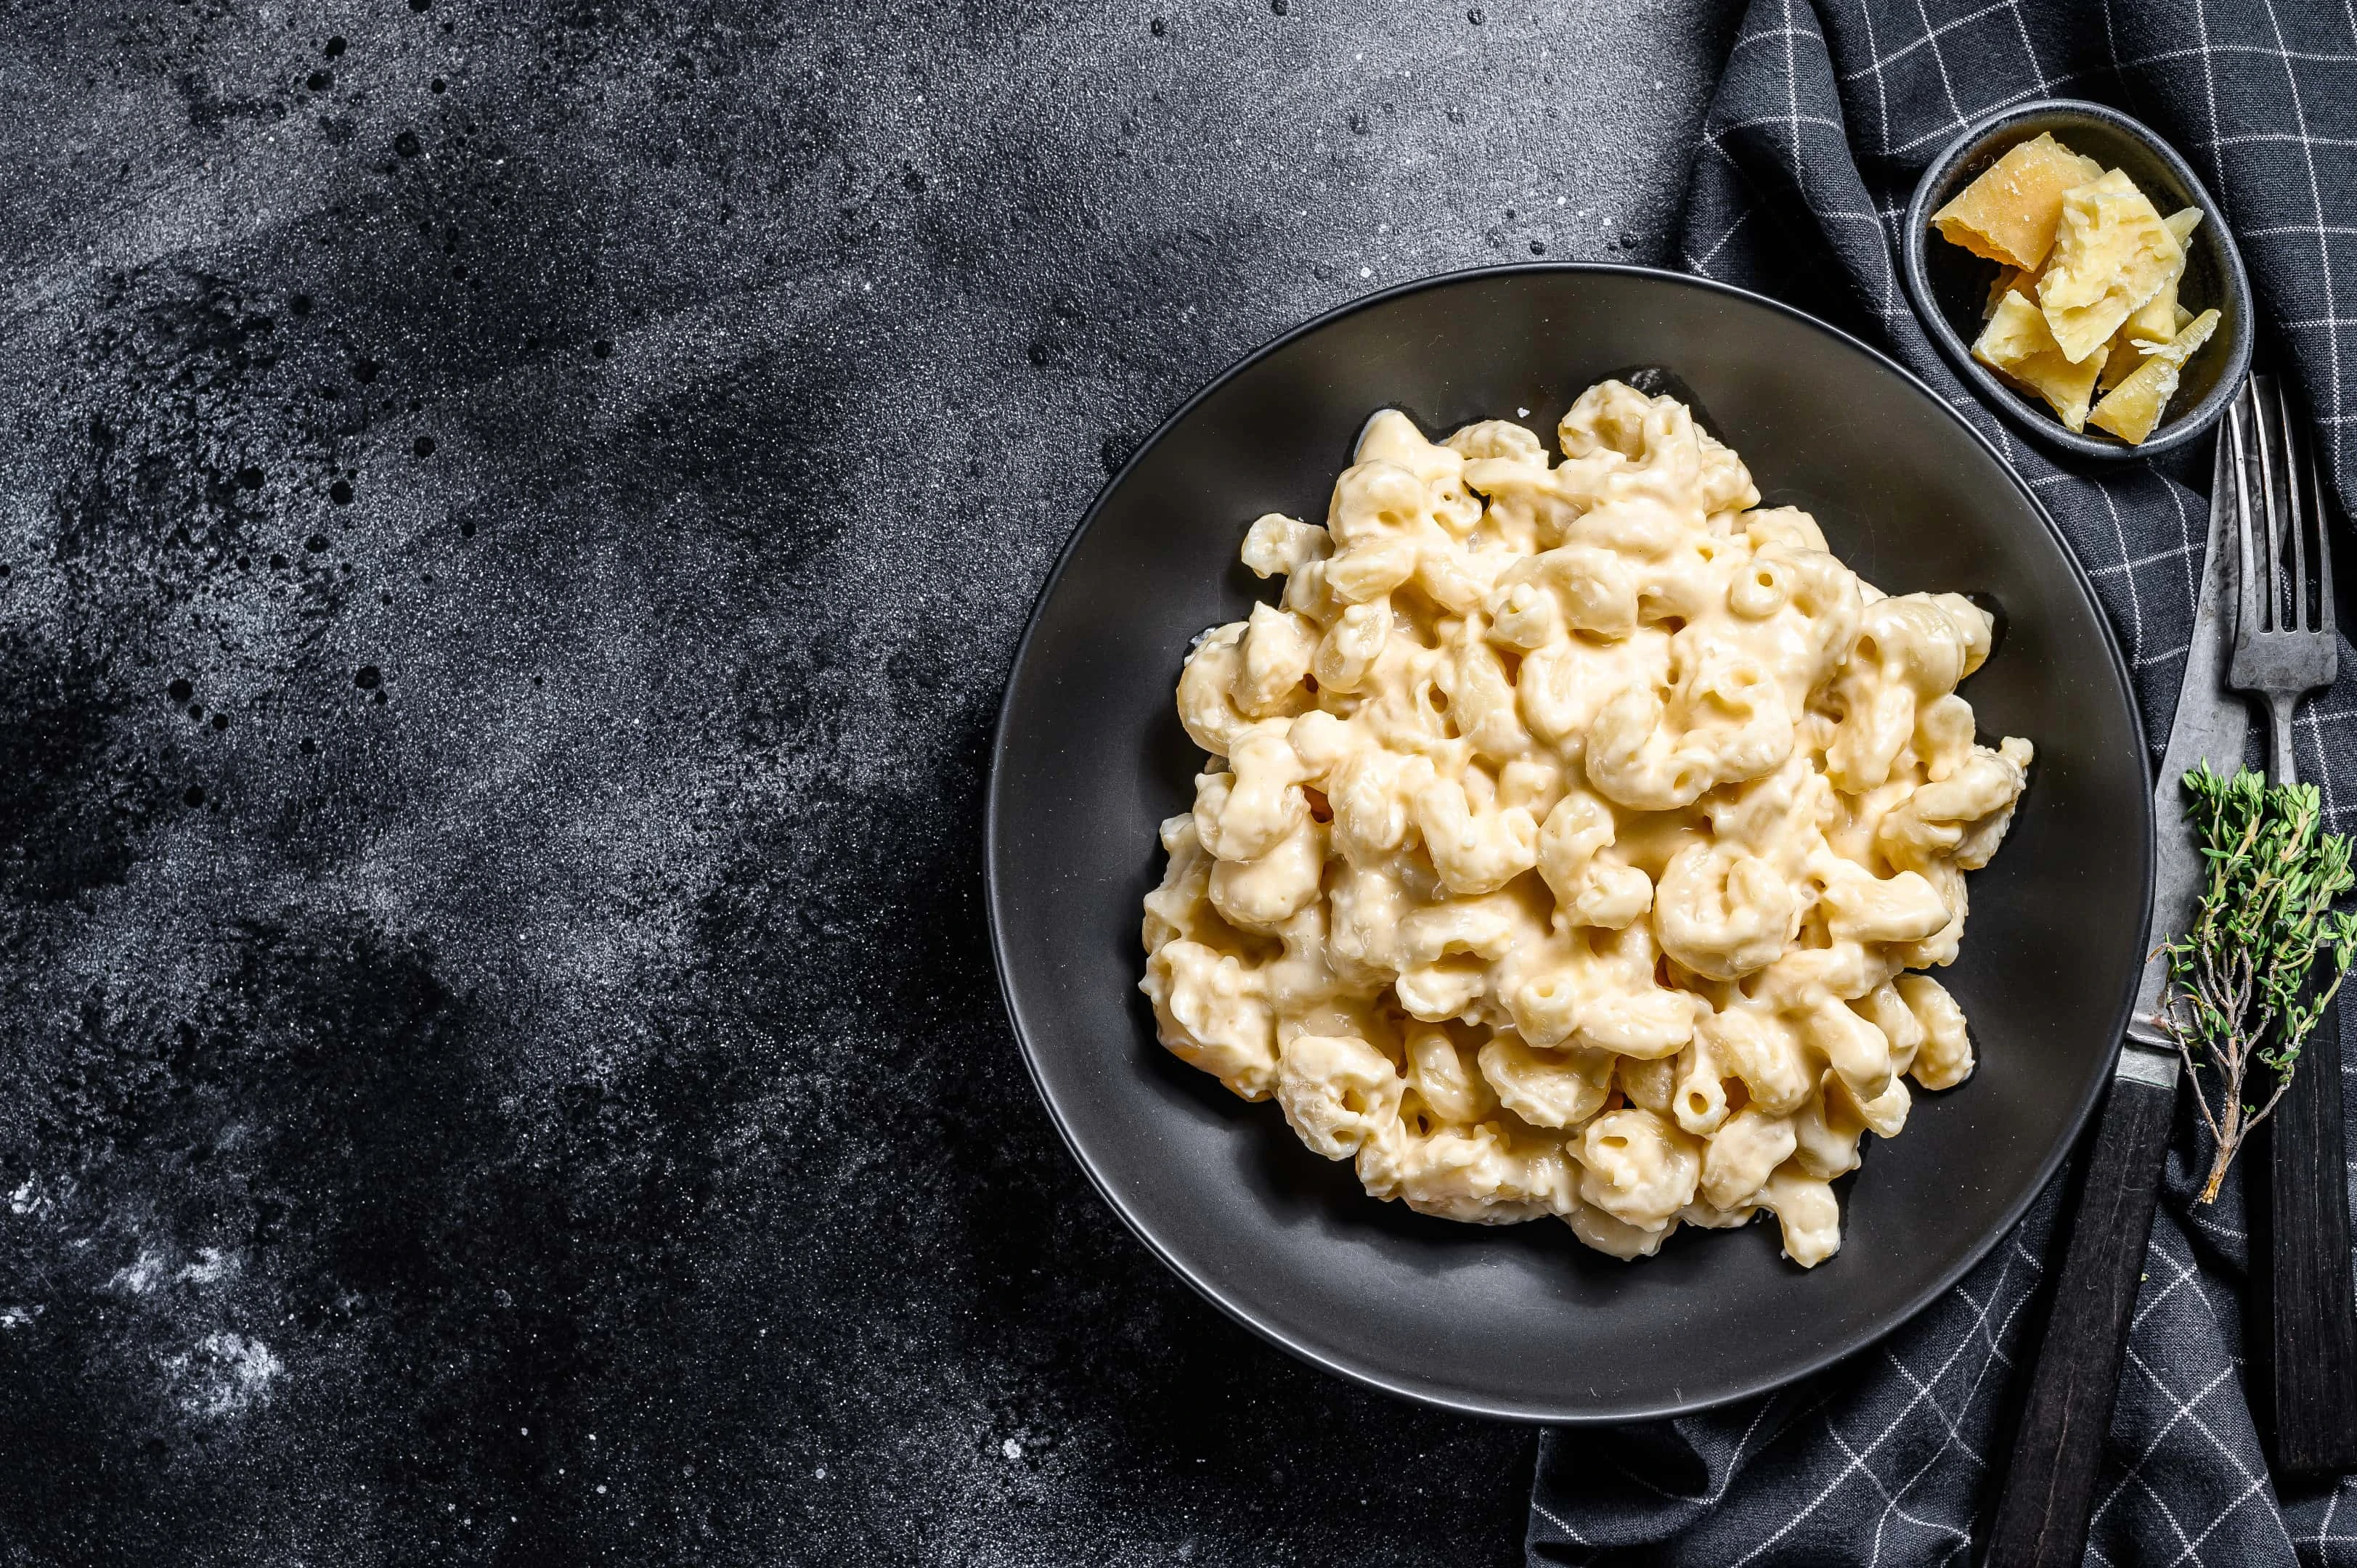 American style macaroni pasta and cheese